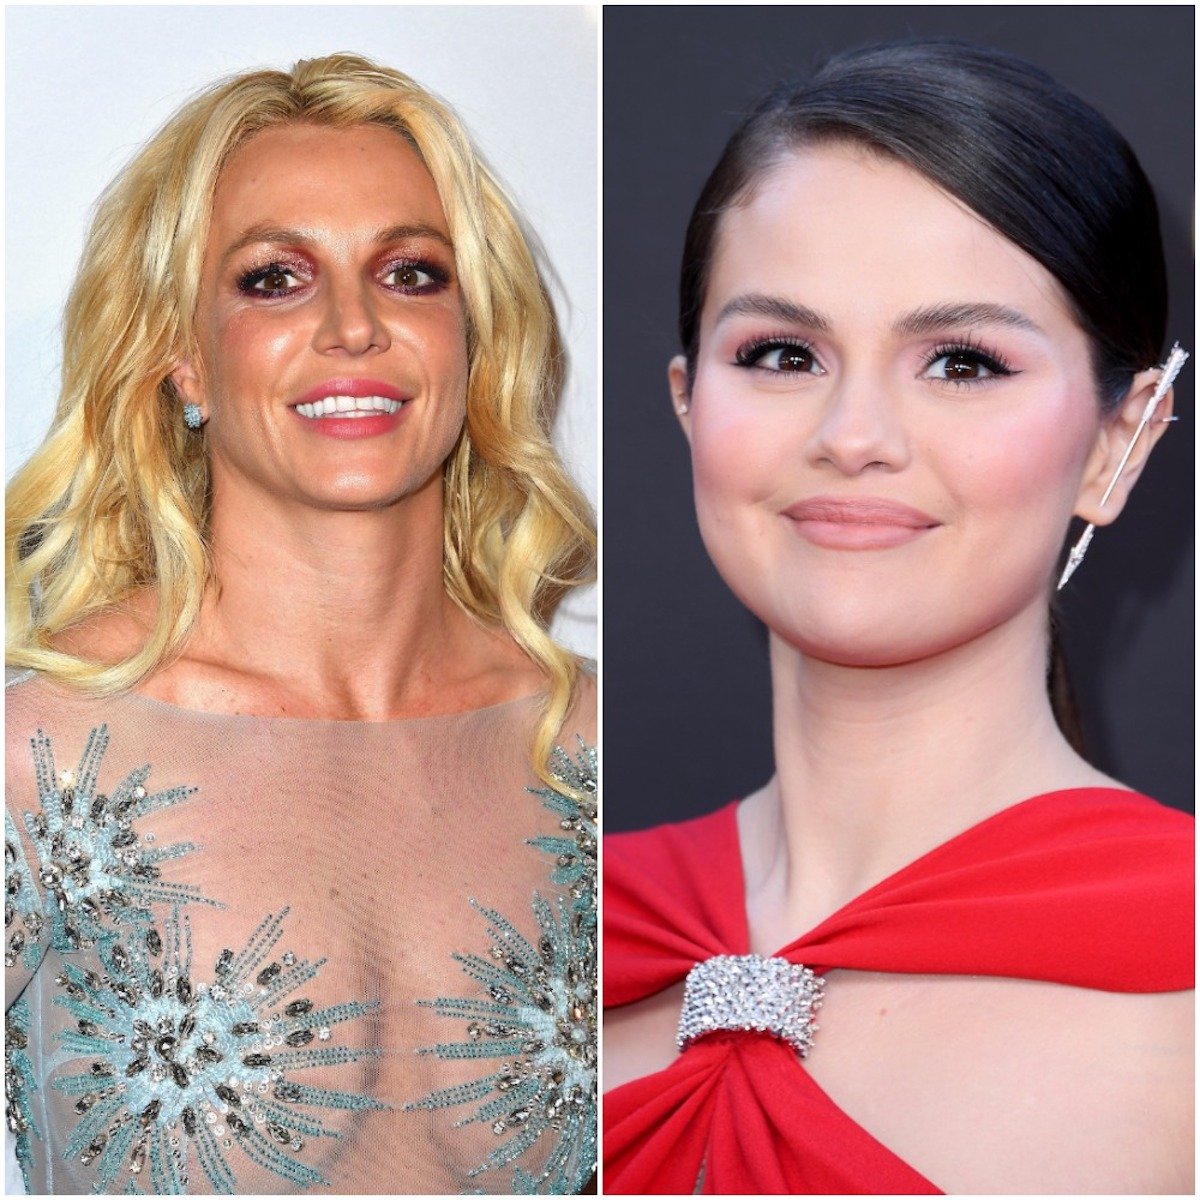 Side by side photos of Britney Spears and Selena Gomez smiling.